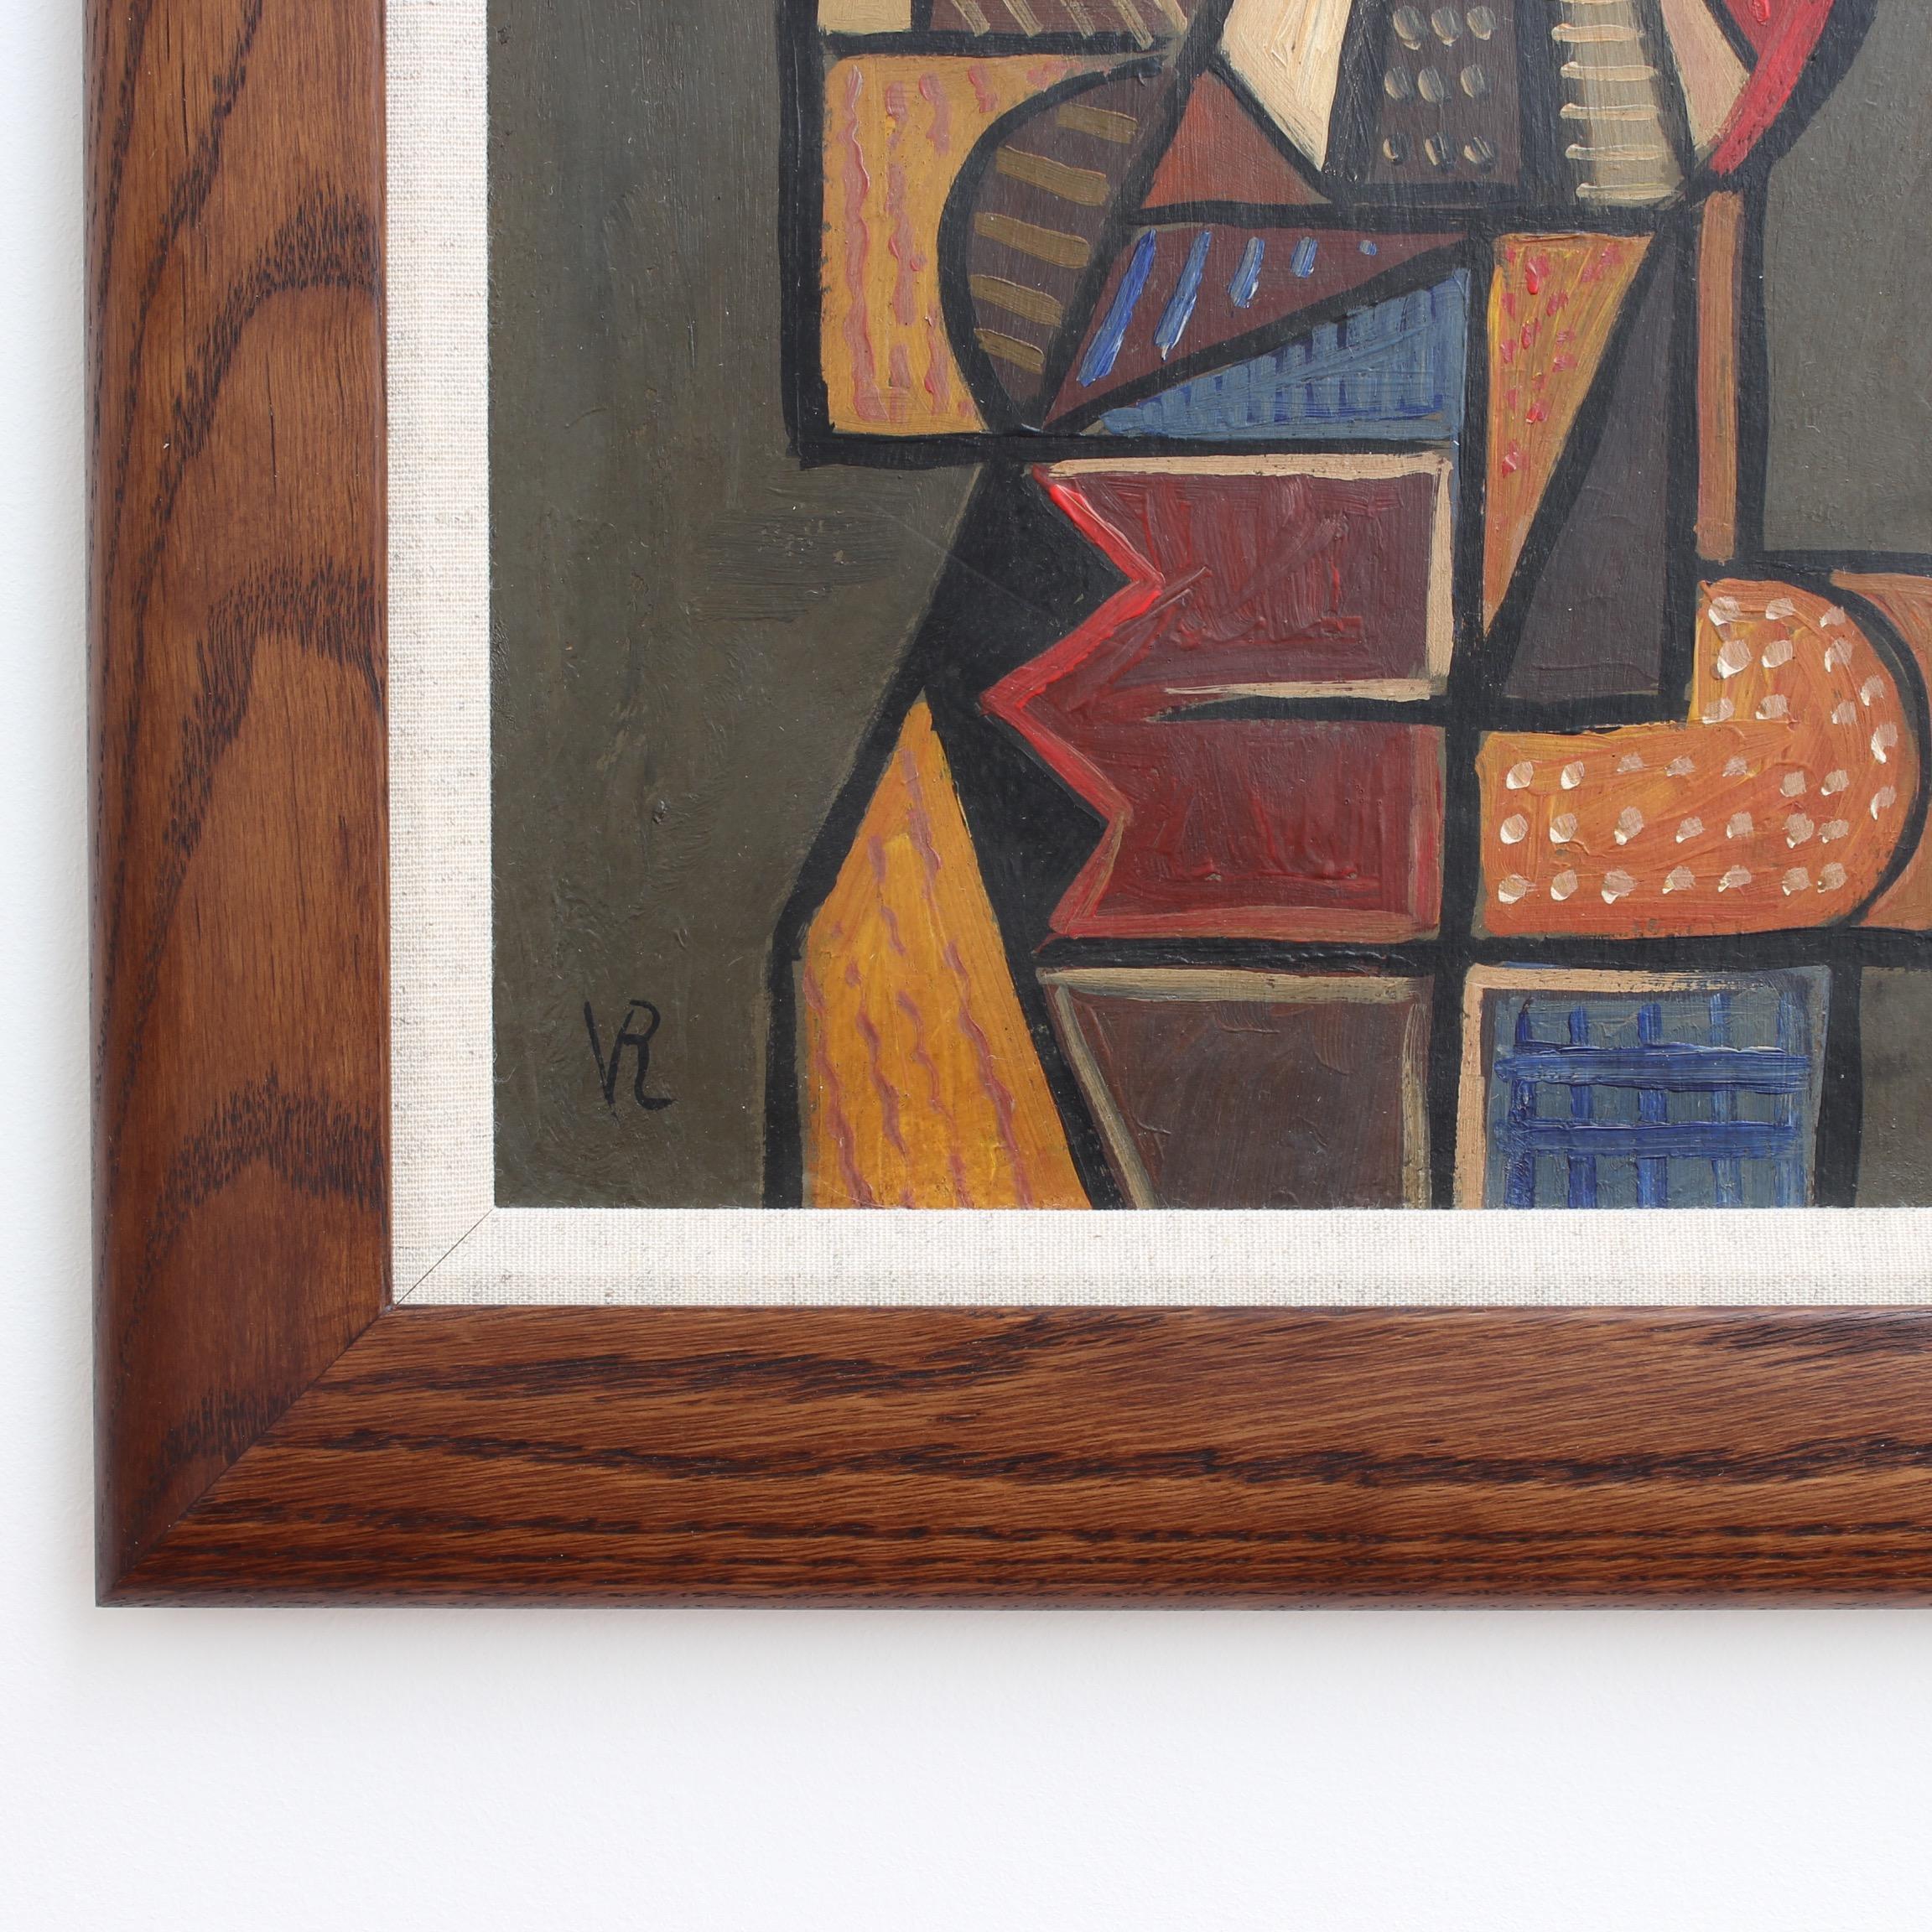 'Portrait of Natural Man', oil on board (circa 1940s - 1960s). Inspired by the works of Picasso and Braque, this is a colourful cubist portrait of a broad-shouldered, pre-industrial man. A solid person of structured squares, rectangles and a few